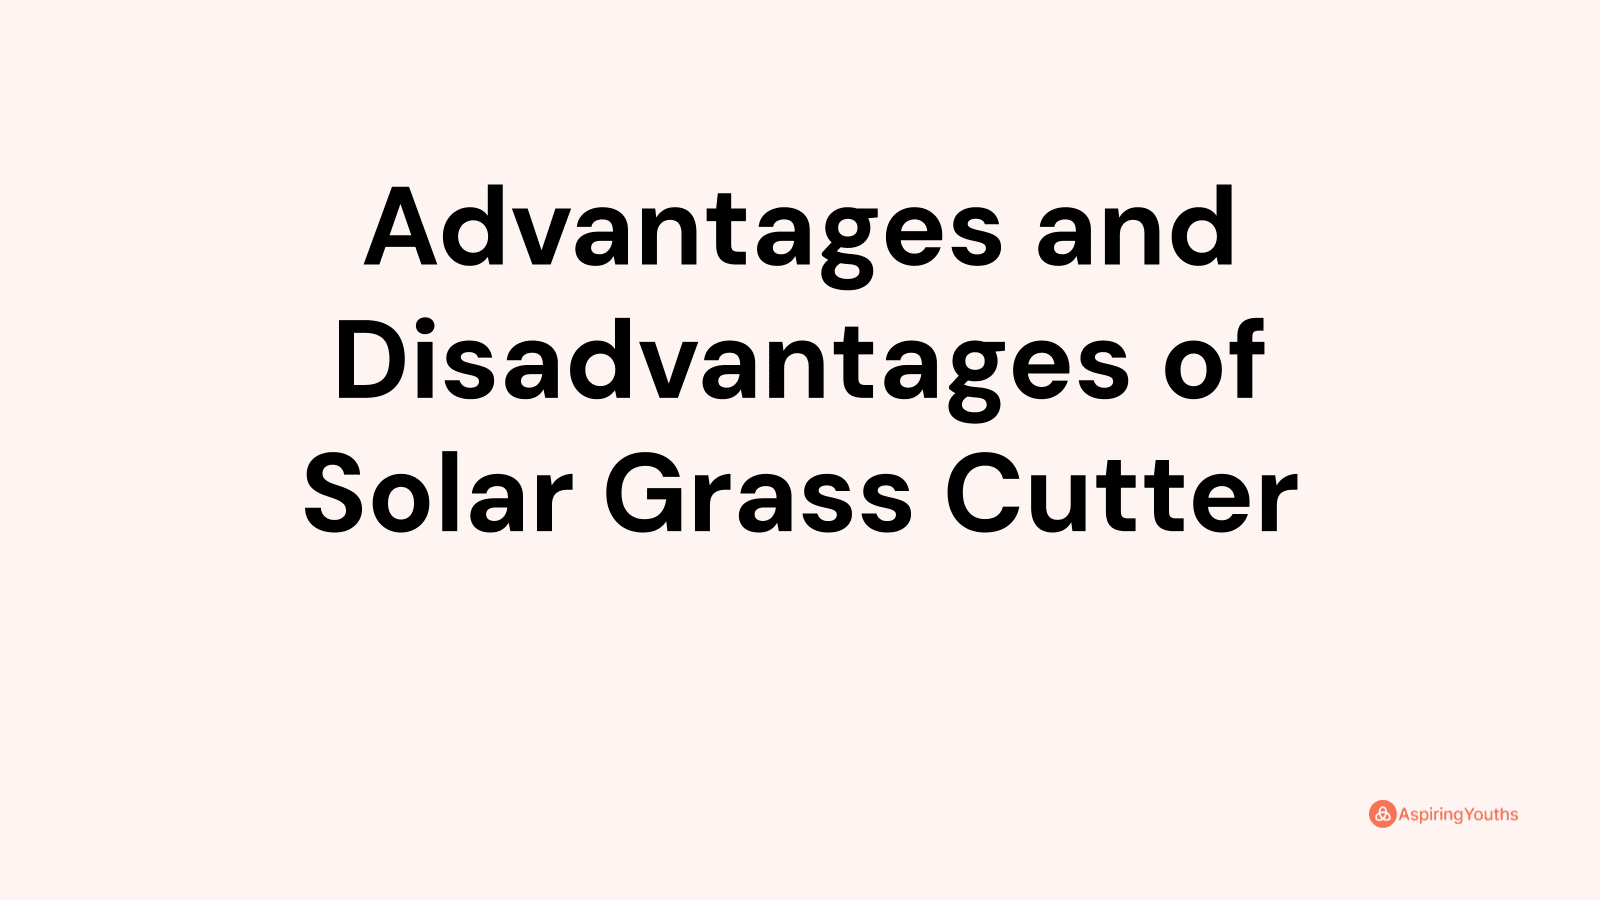 Advantages and disadvantages of Solar Grass Cutter